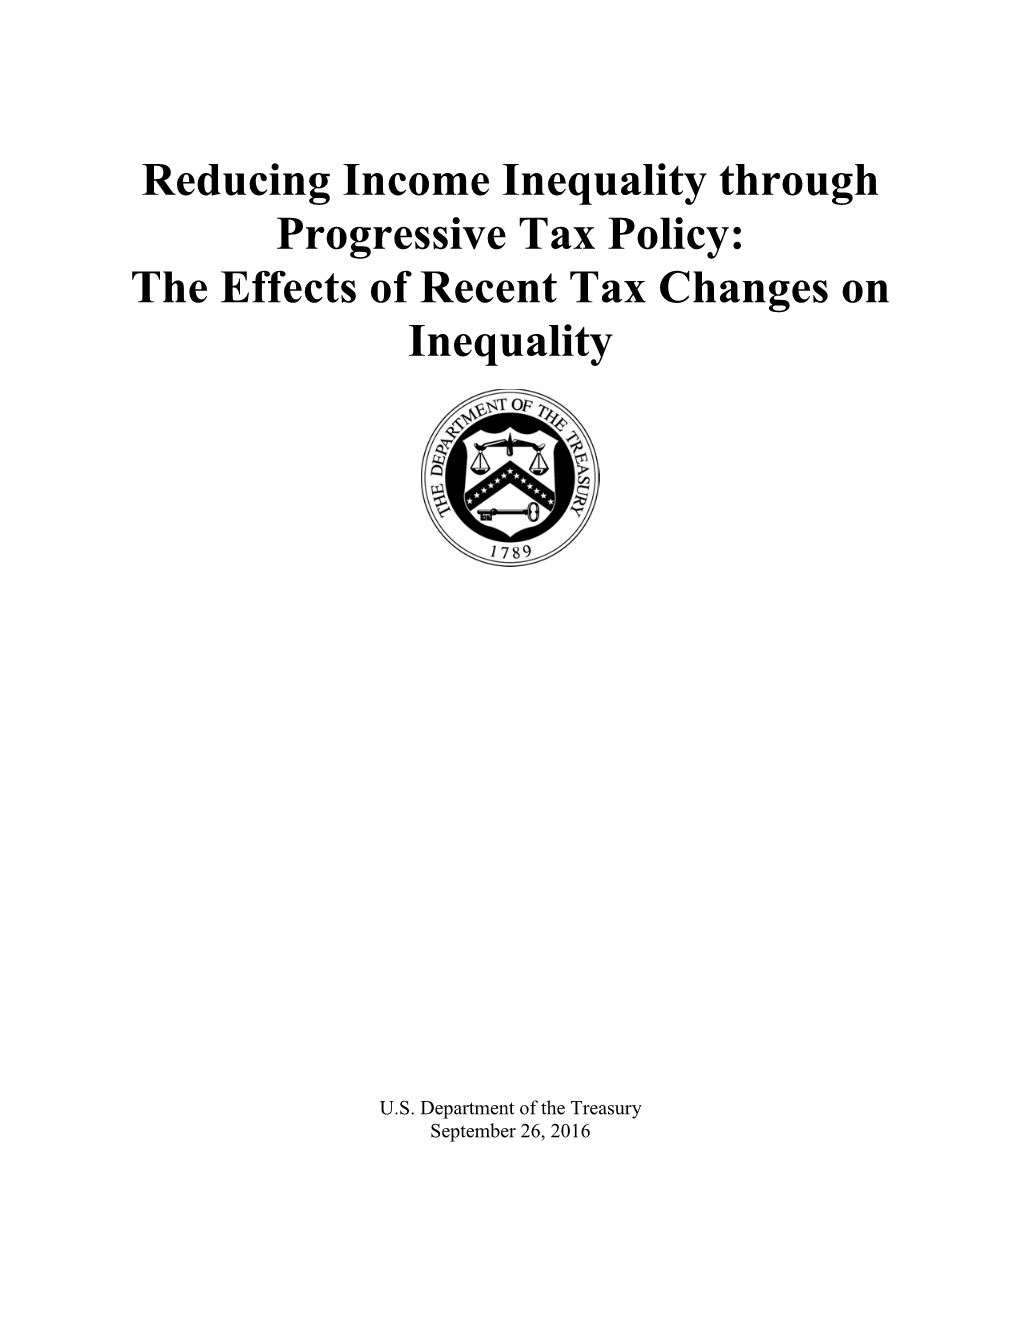 Reducing Income Inequality Through Progressive Tax Policy: the Effects of Recent Tax Changes on Inequality